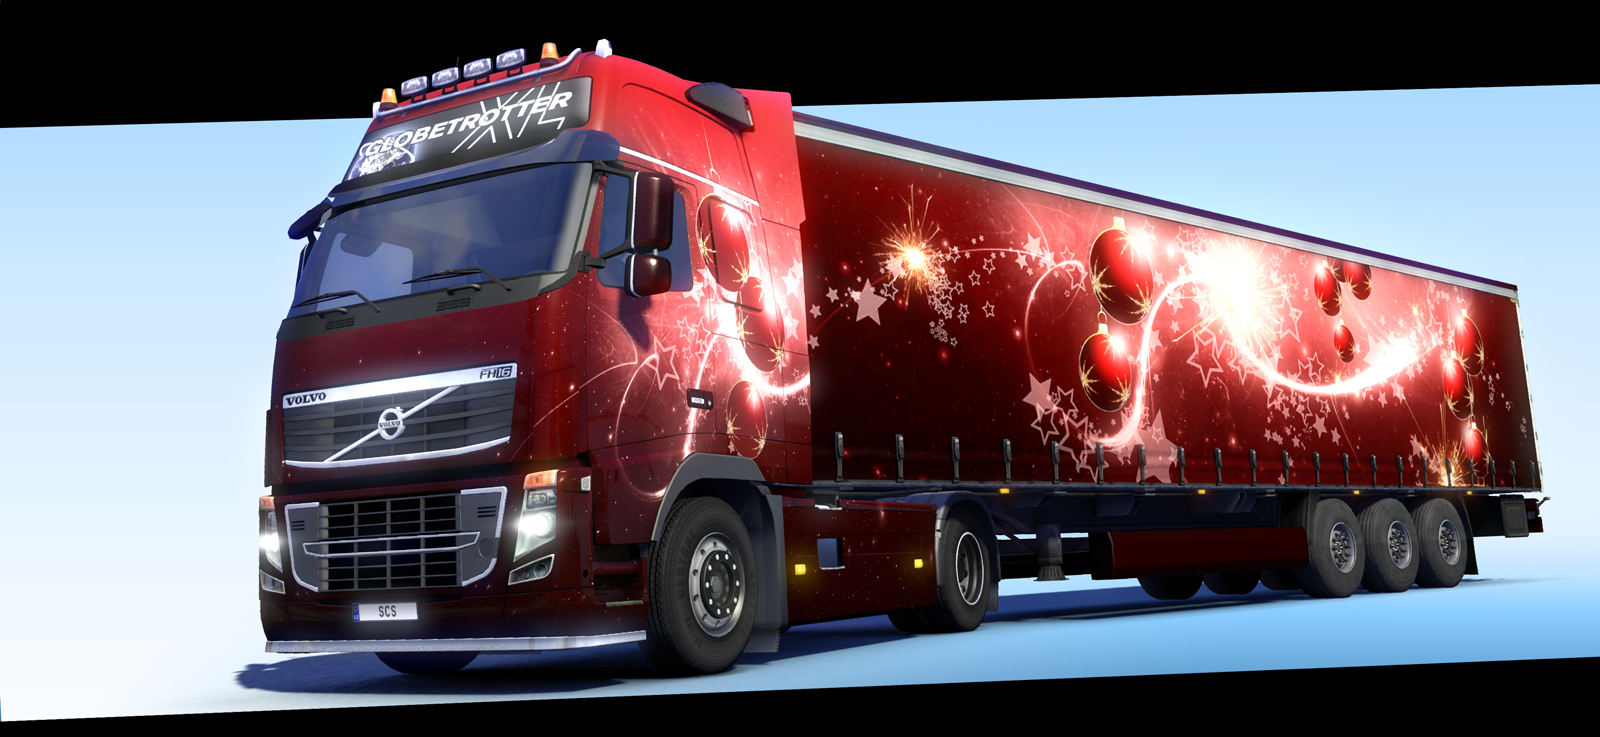 ets2_xmas_cargo_gifts_a_004.jpg